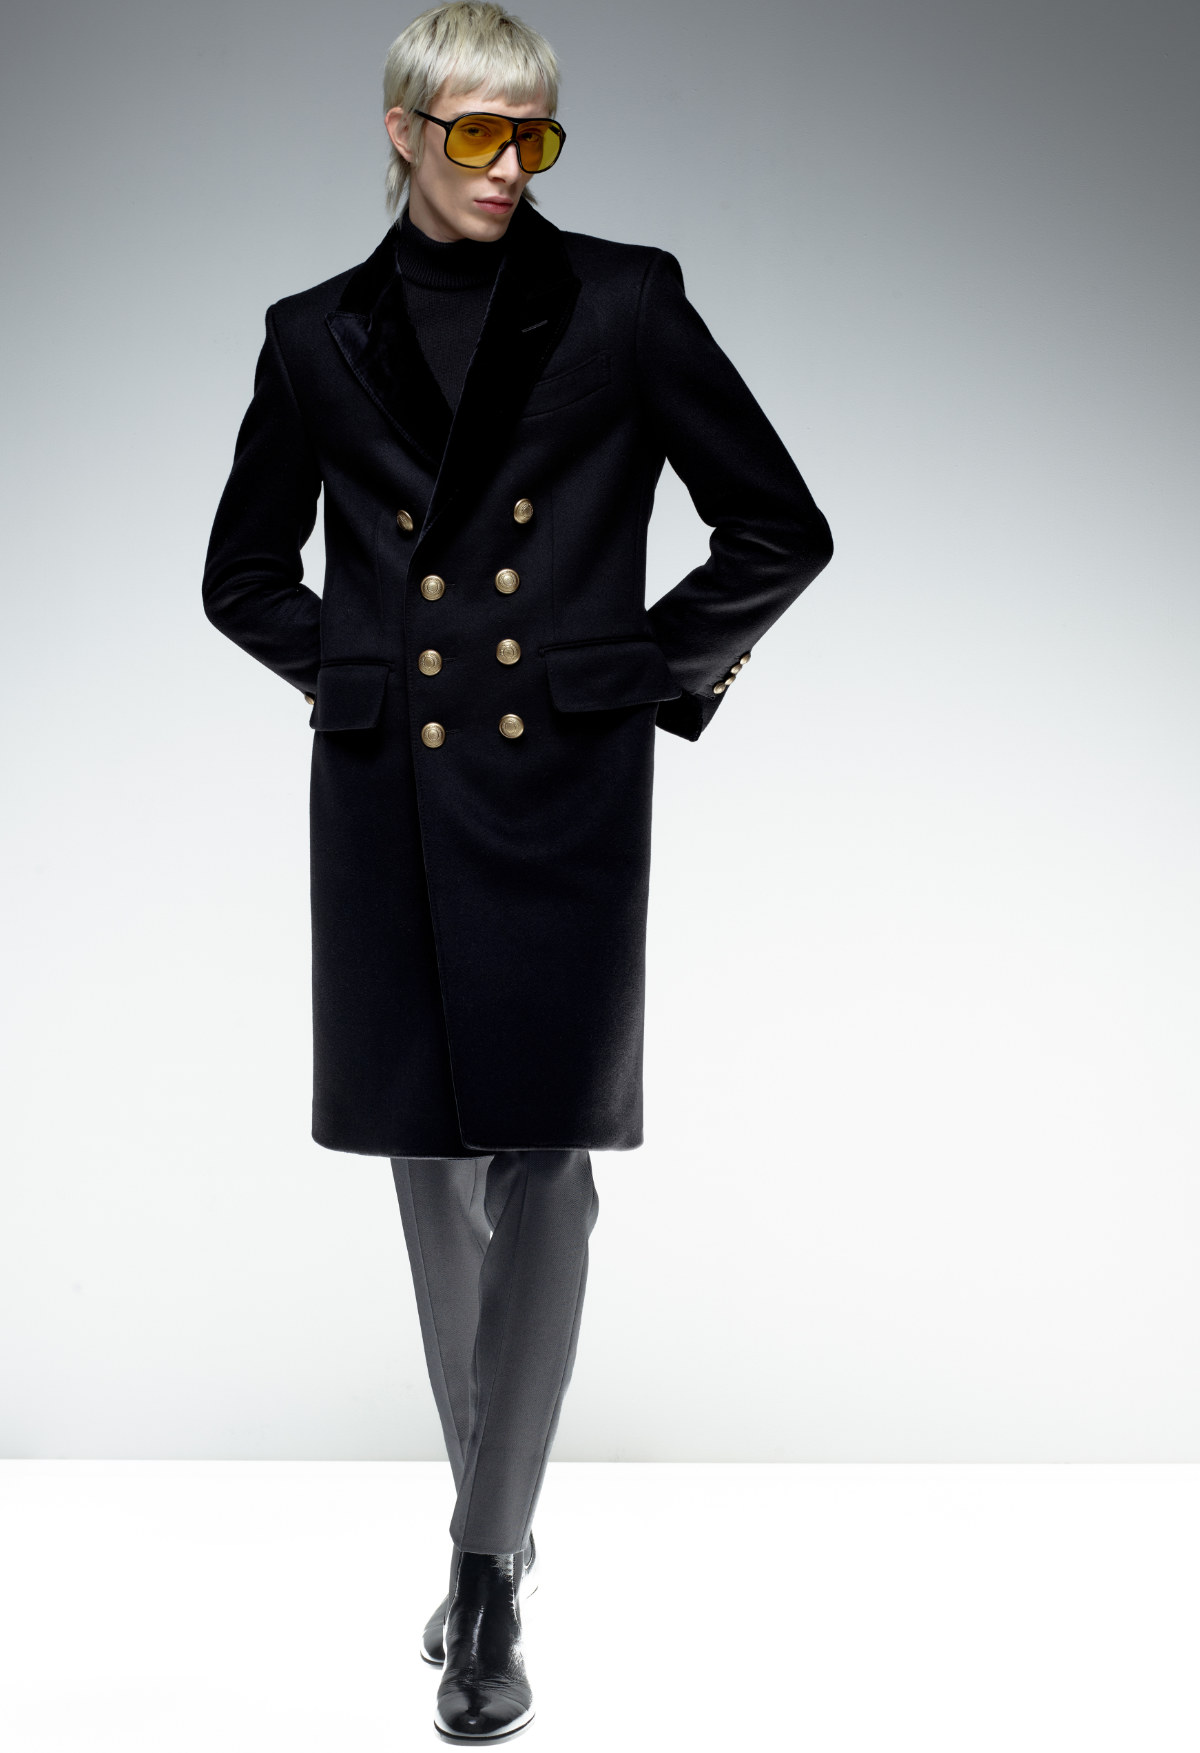 Tom Ford's Autum-Winter 2021 Menswear Collection